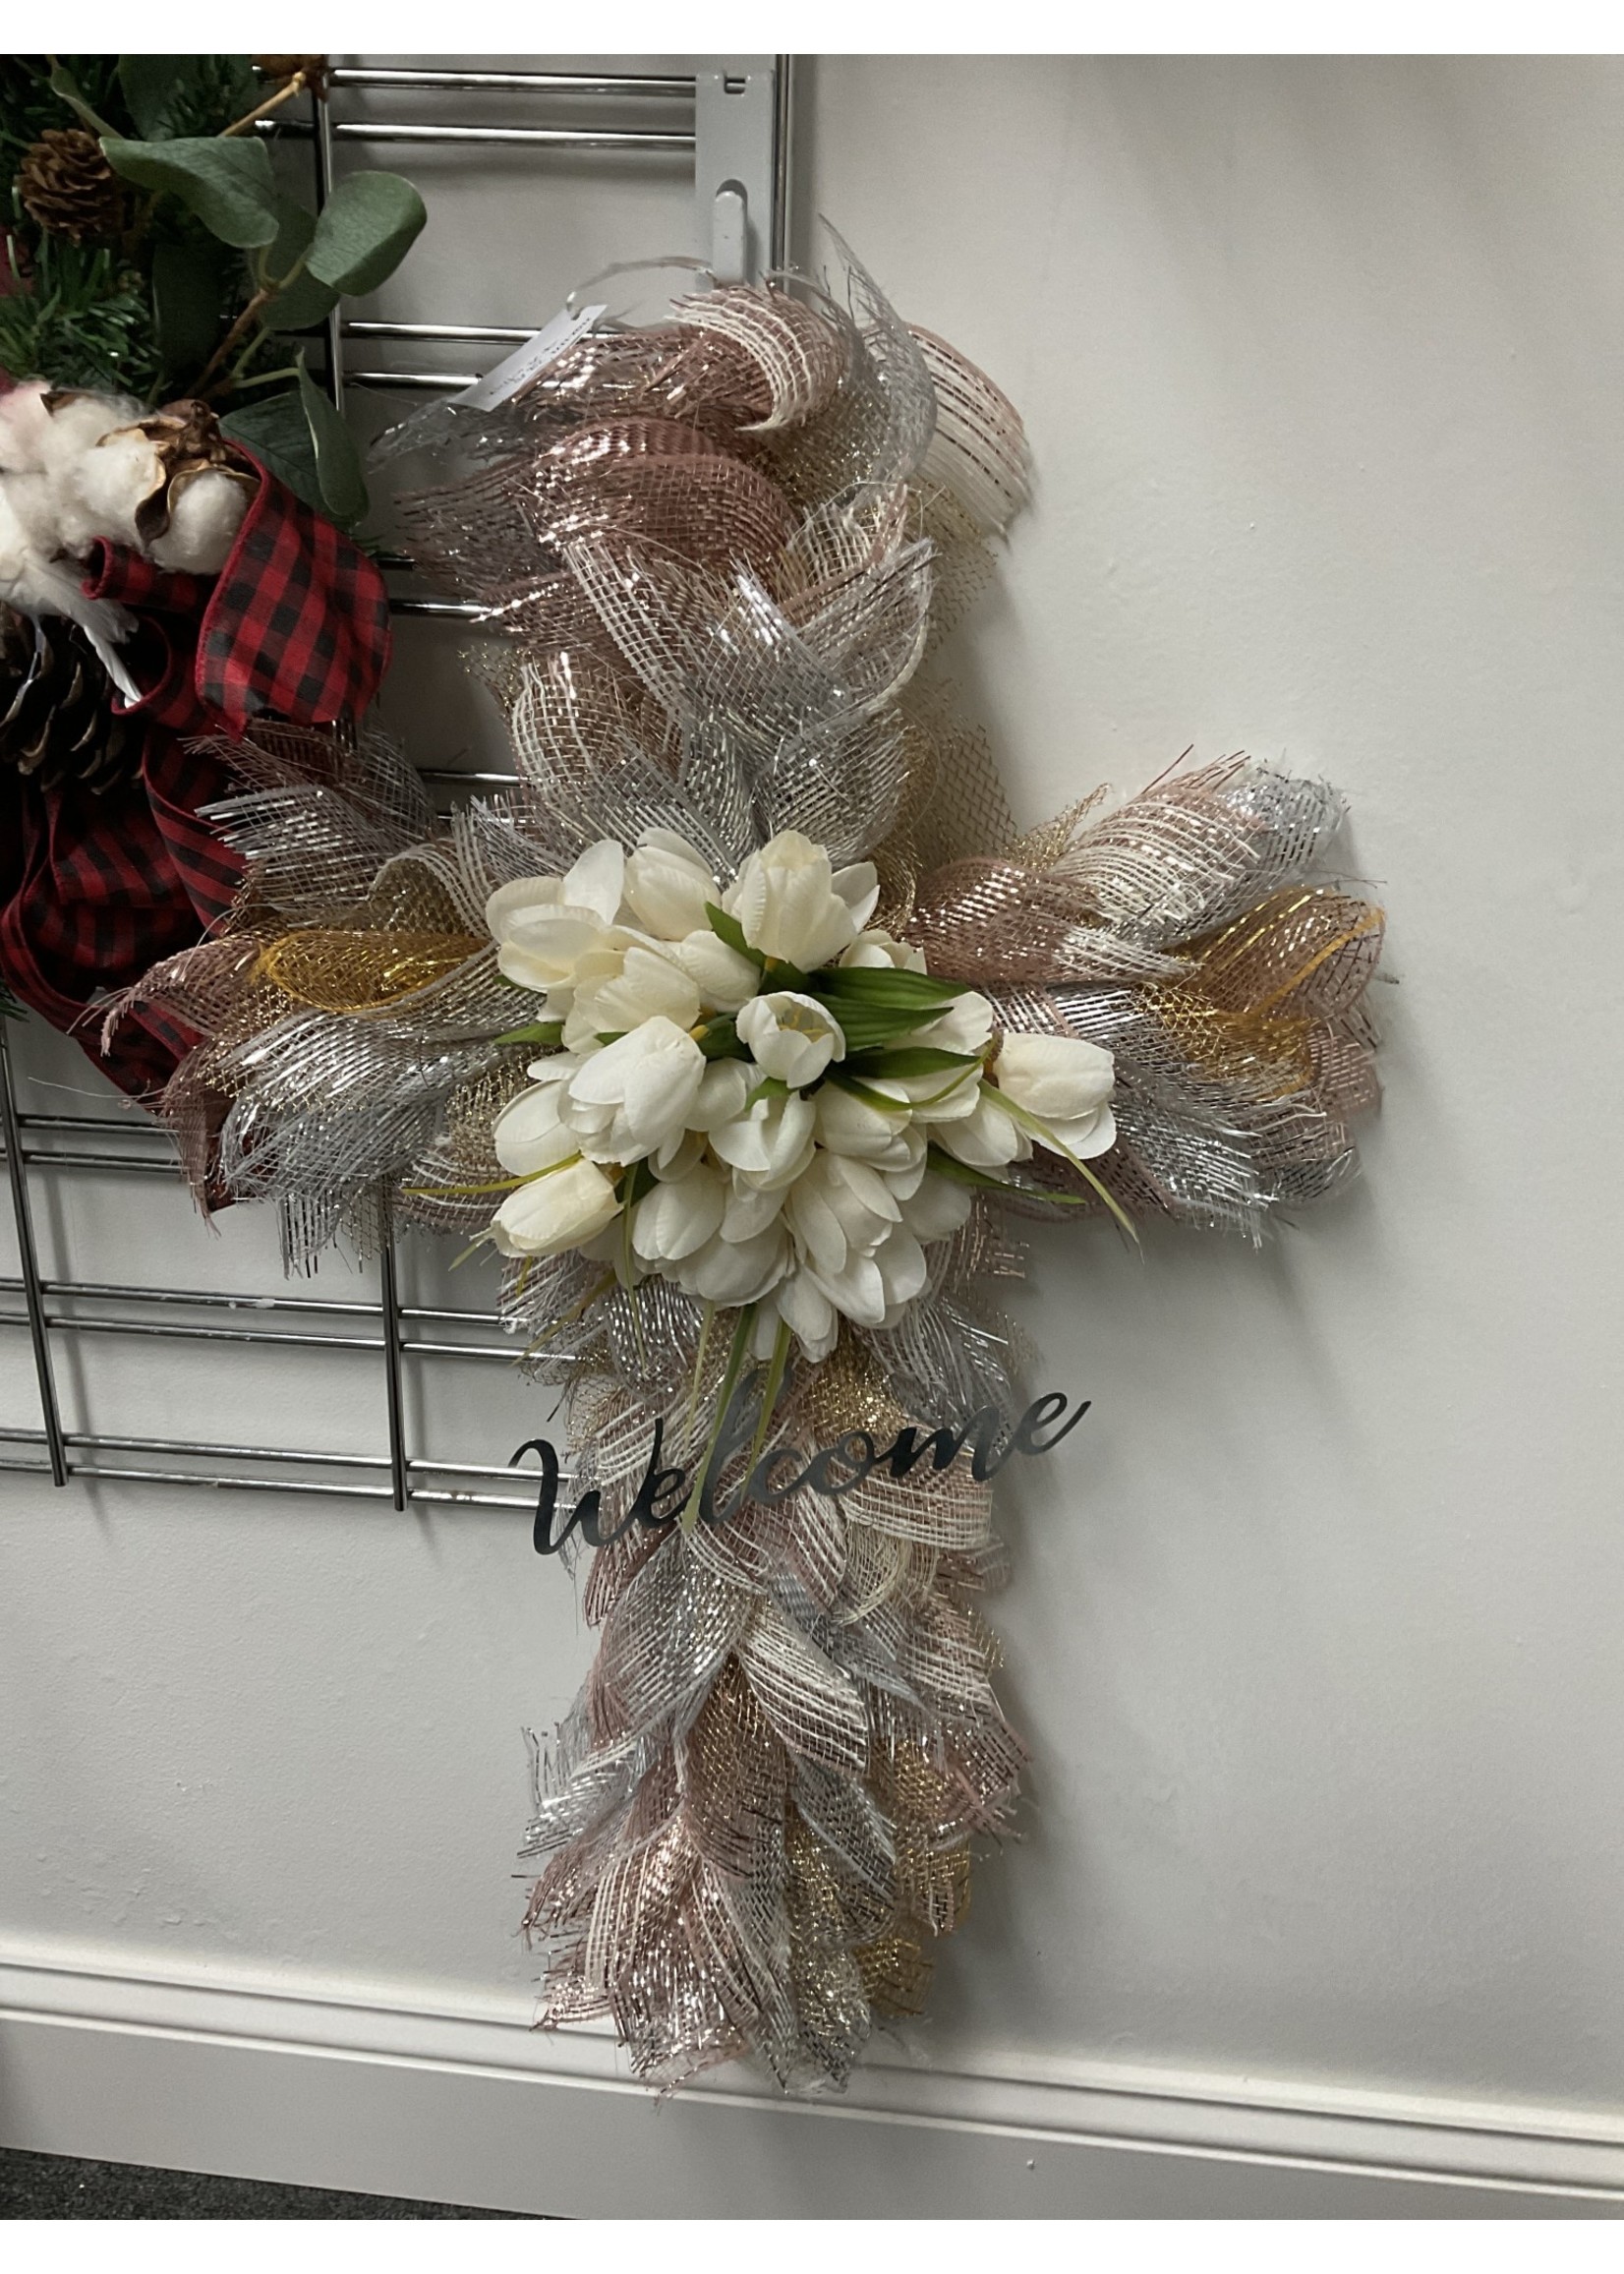 My New Favorite Thing Wreath Cross Gold, Silver & Metal Tones "Welcome" with White Tulips 18 inch